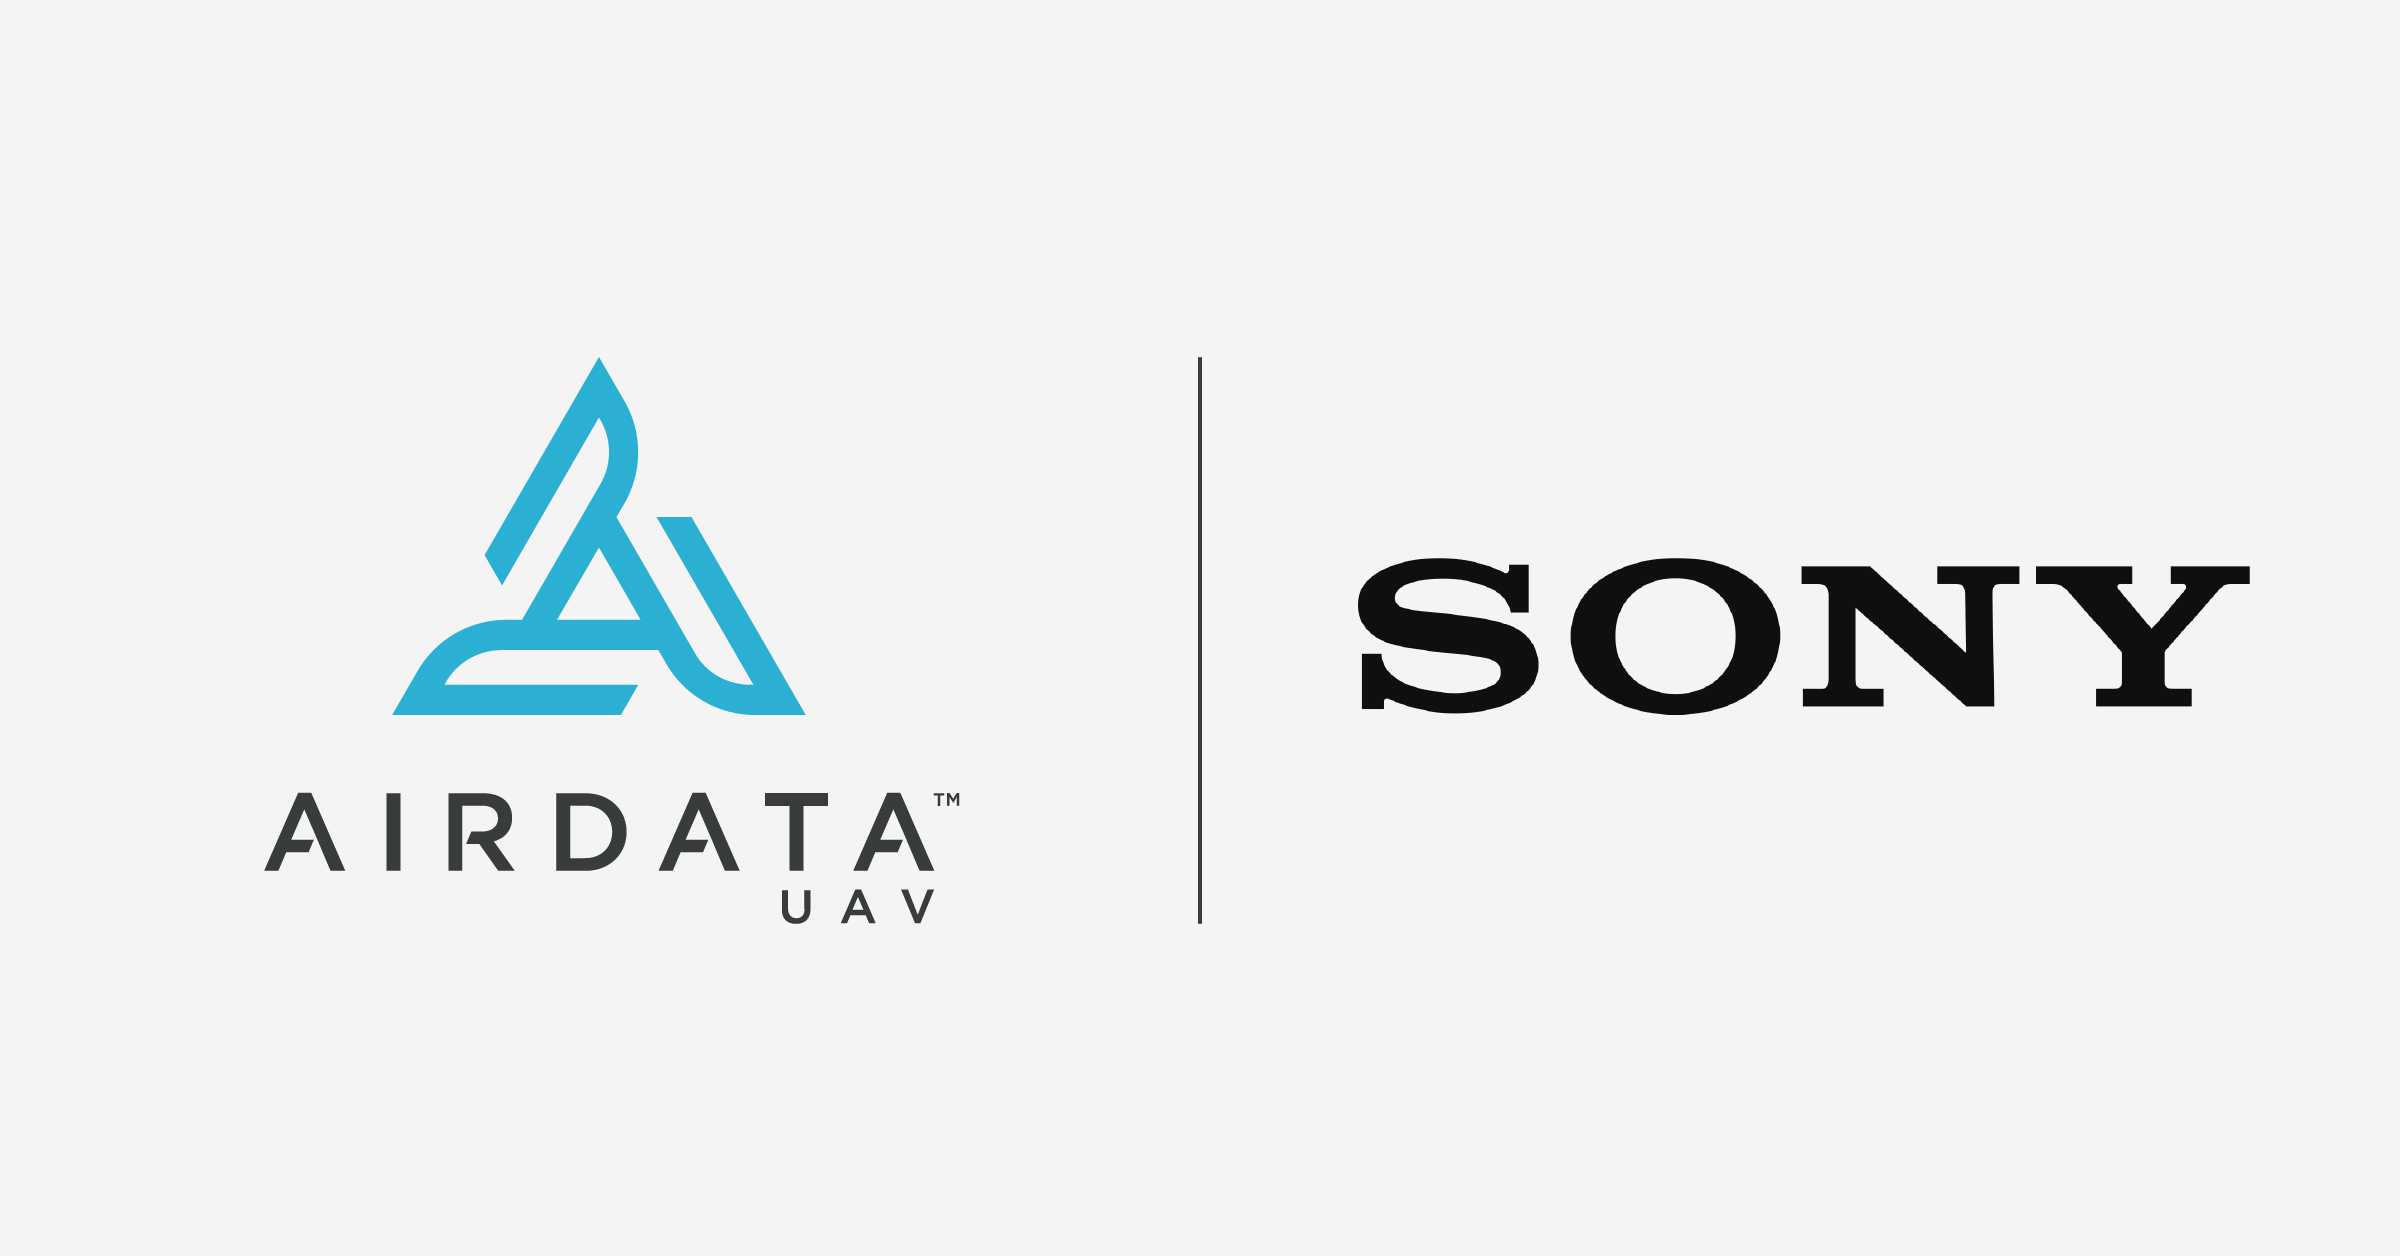 AirData UAV Partners with Sony Electronics to Provide Fleet Management for Airpeak S1 Drone